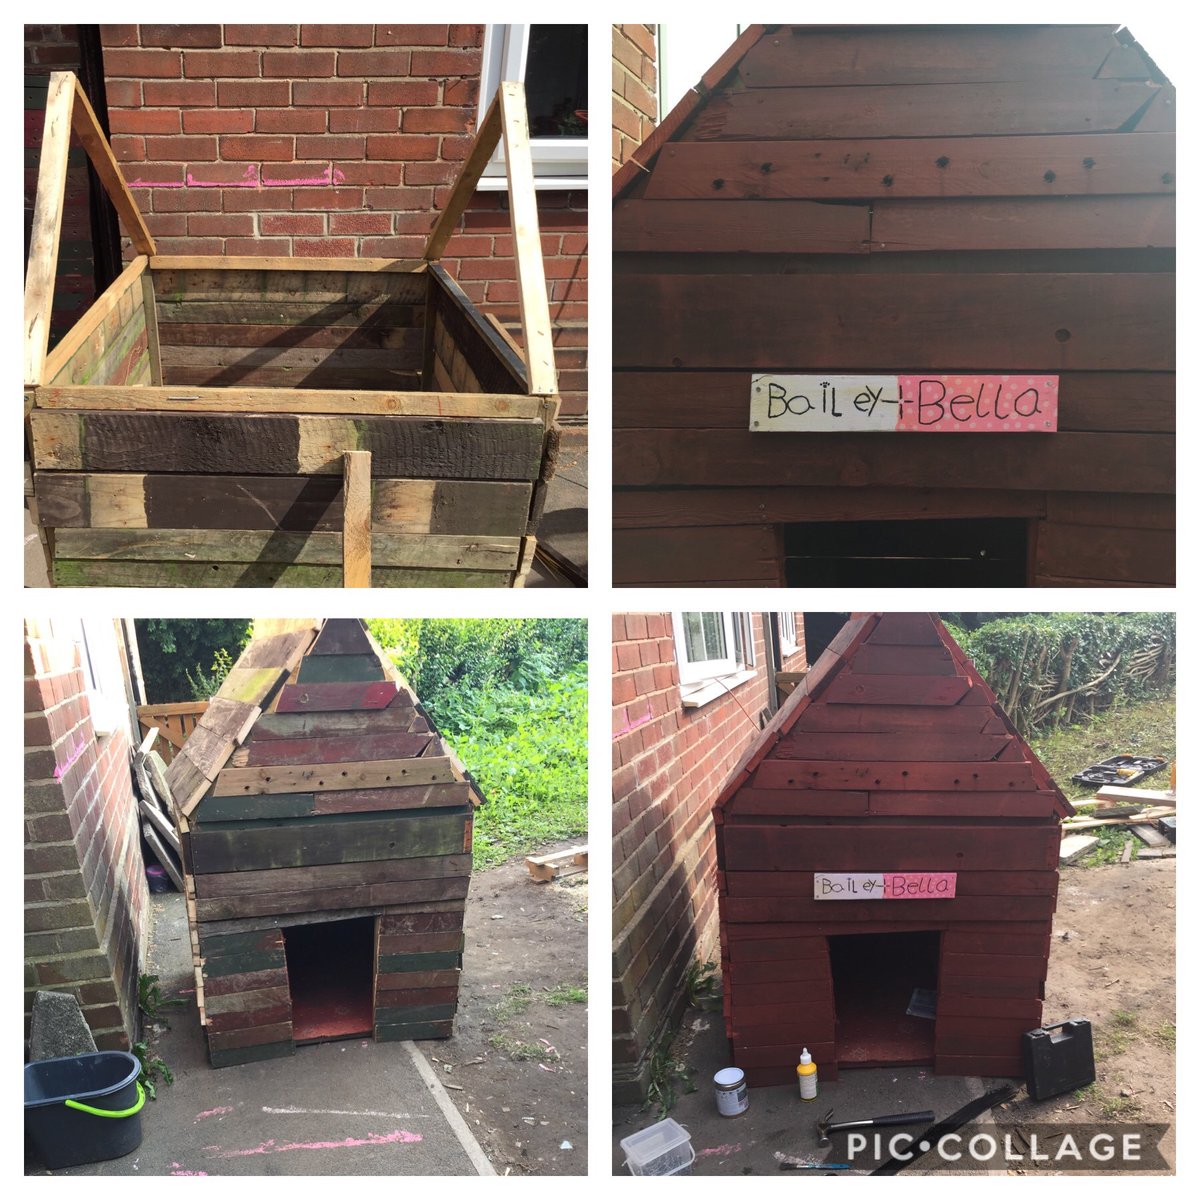 Young talent creating a recycled dog kennel in their new forever home #realisingpotential #youngpeople #recycledmaterials #recycling @GIPSIL_Leeds @ElevateLeeds1 @Archwayleeds @TLA_Seacole @YouthServiceENE @LeedsEastCLLD @OppShopsGIPSIL @Engage_Leeds